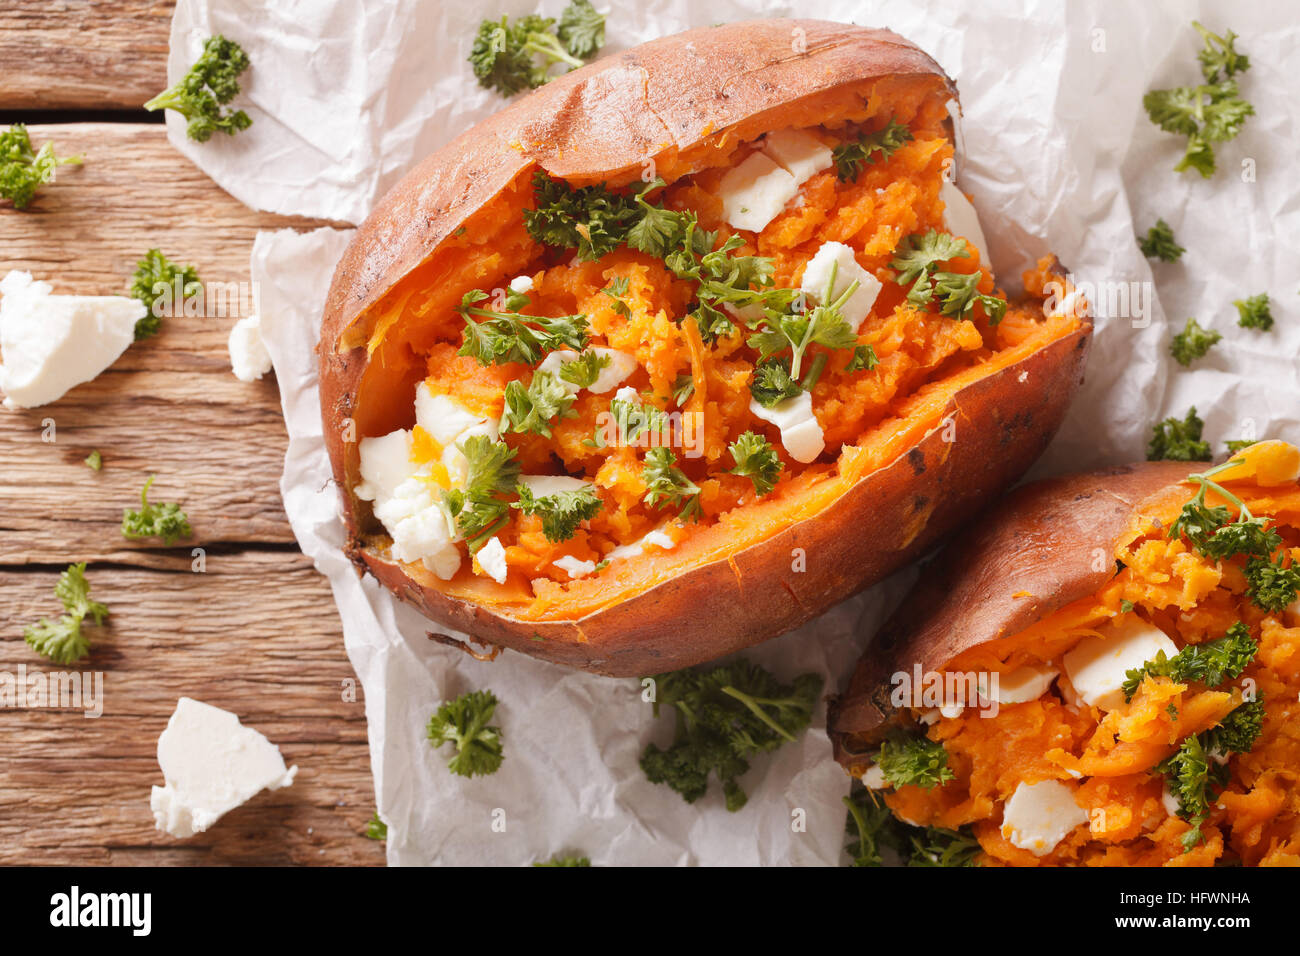 healthy food: baked sweet potato stuffed with feta cheese and parsley close-up on the table. horizontal view from above Stock Photo